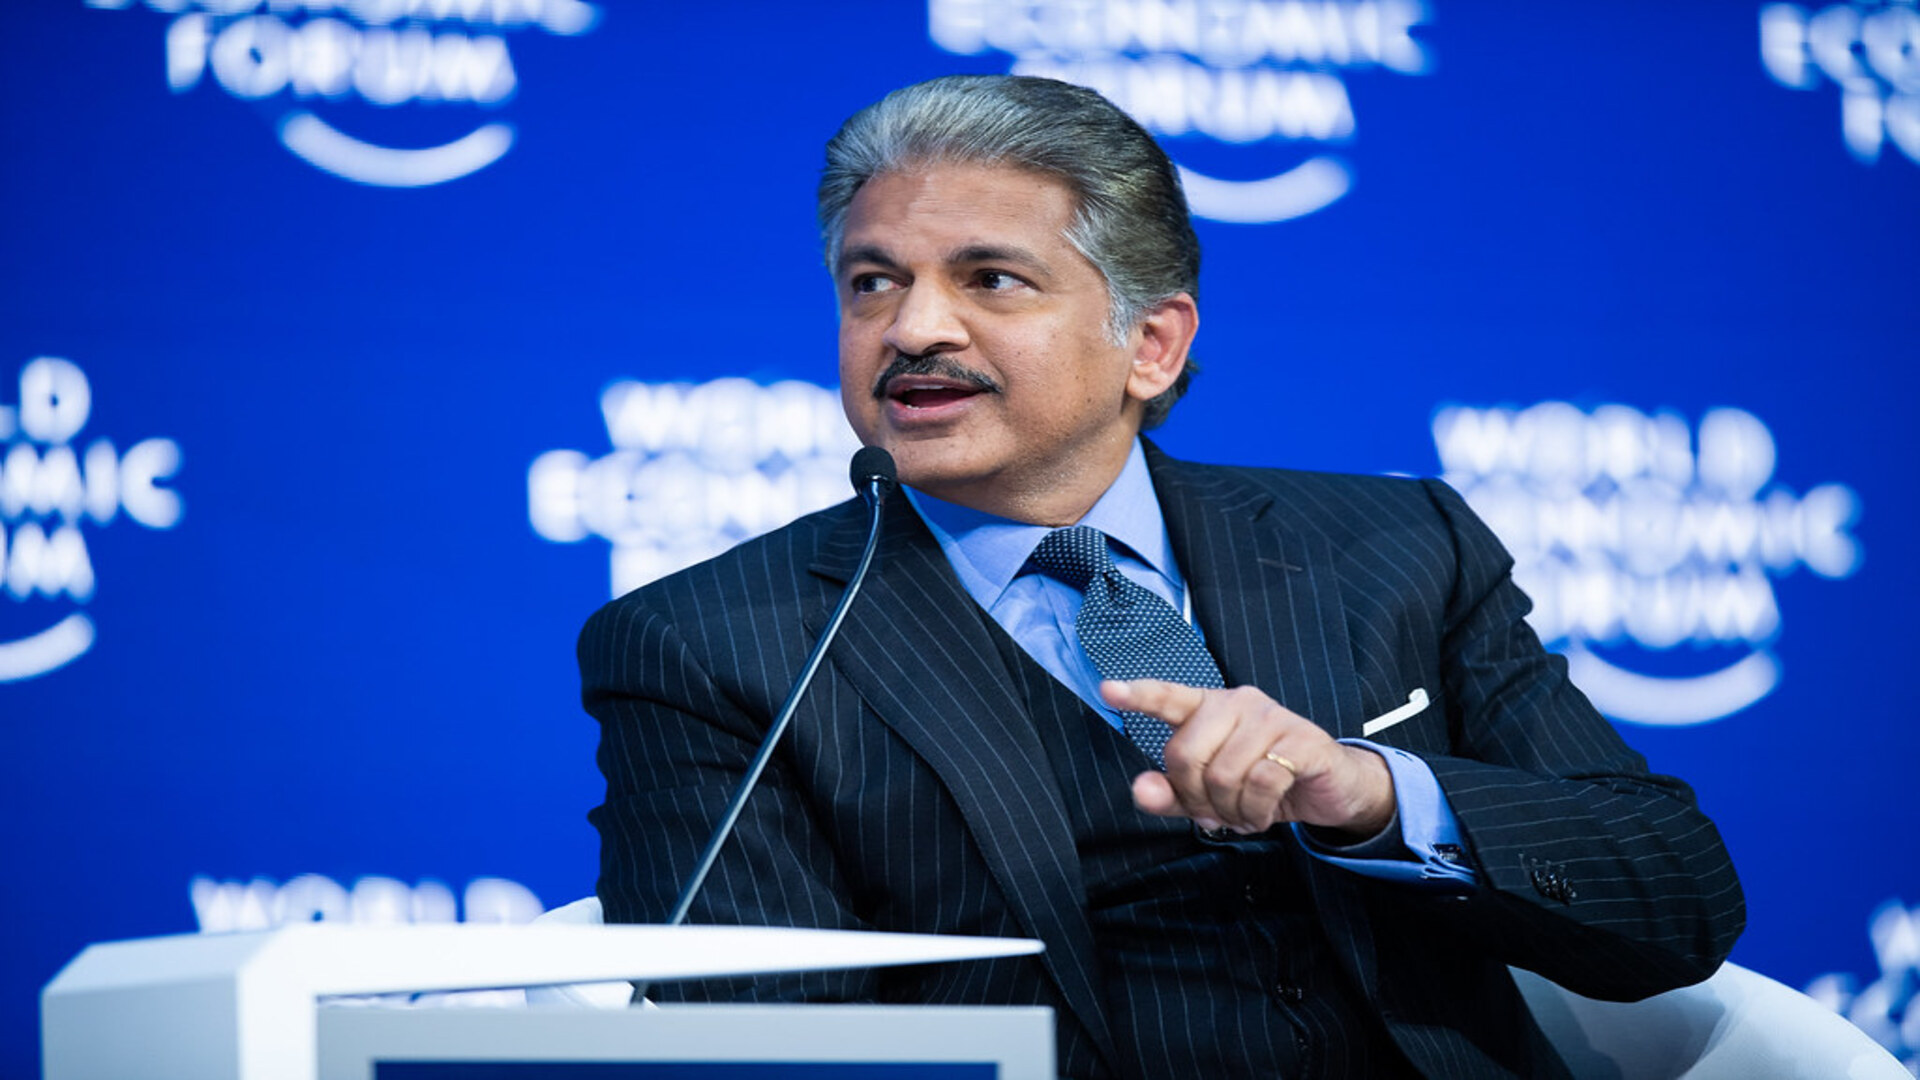 UPSC more difficult than IIT JEE, X users tell Anand Mahindra